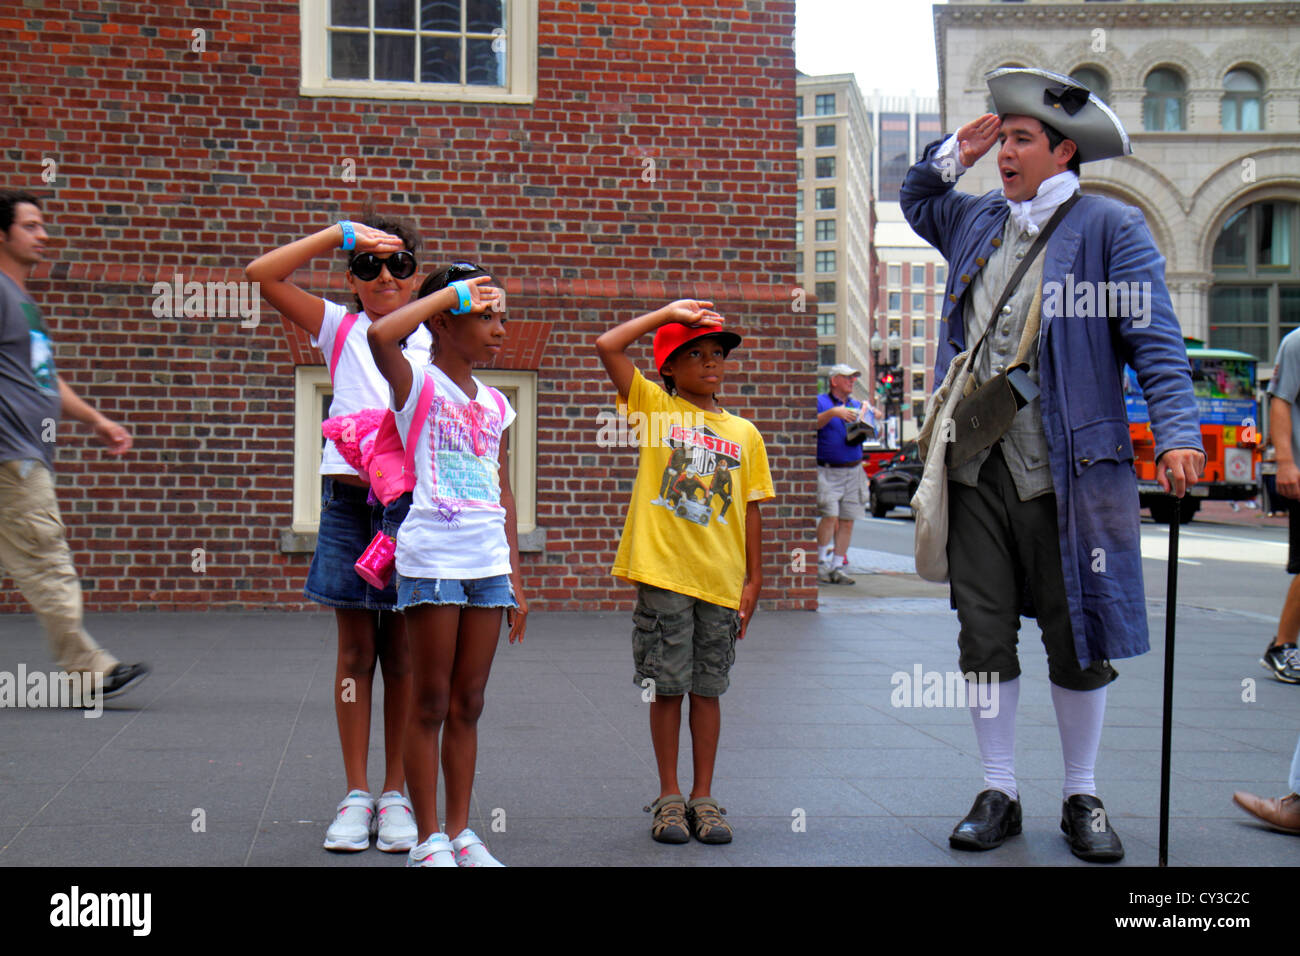 Boston Massachusetts,Washington Street,The Freedom Trail,Old State House,historic building,costumed re enactor,actor,man men male adult adults,patriot Stock Photo